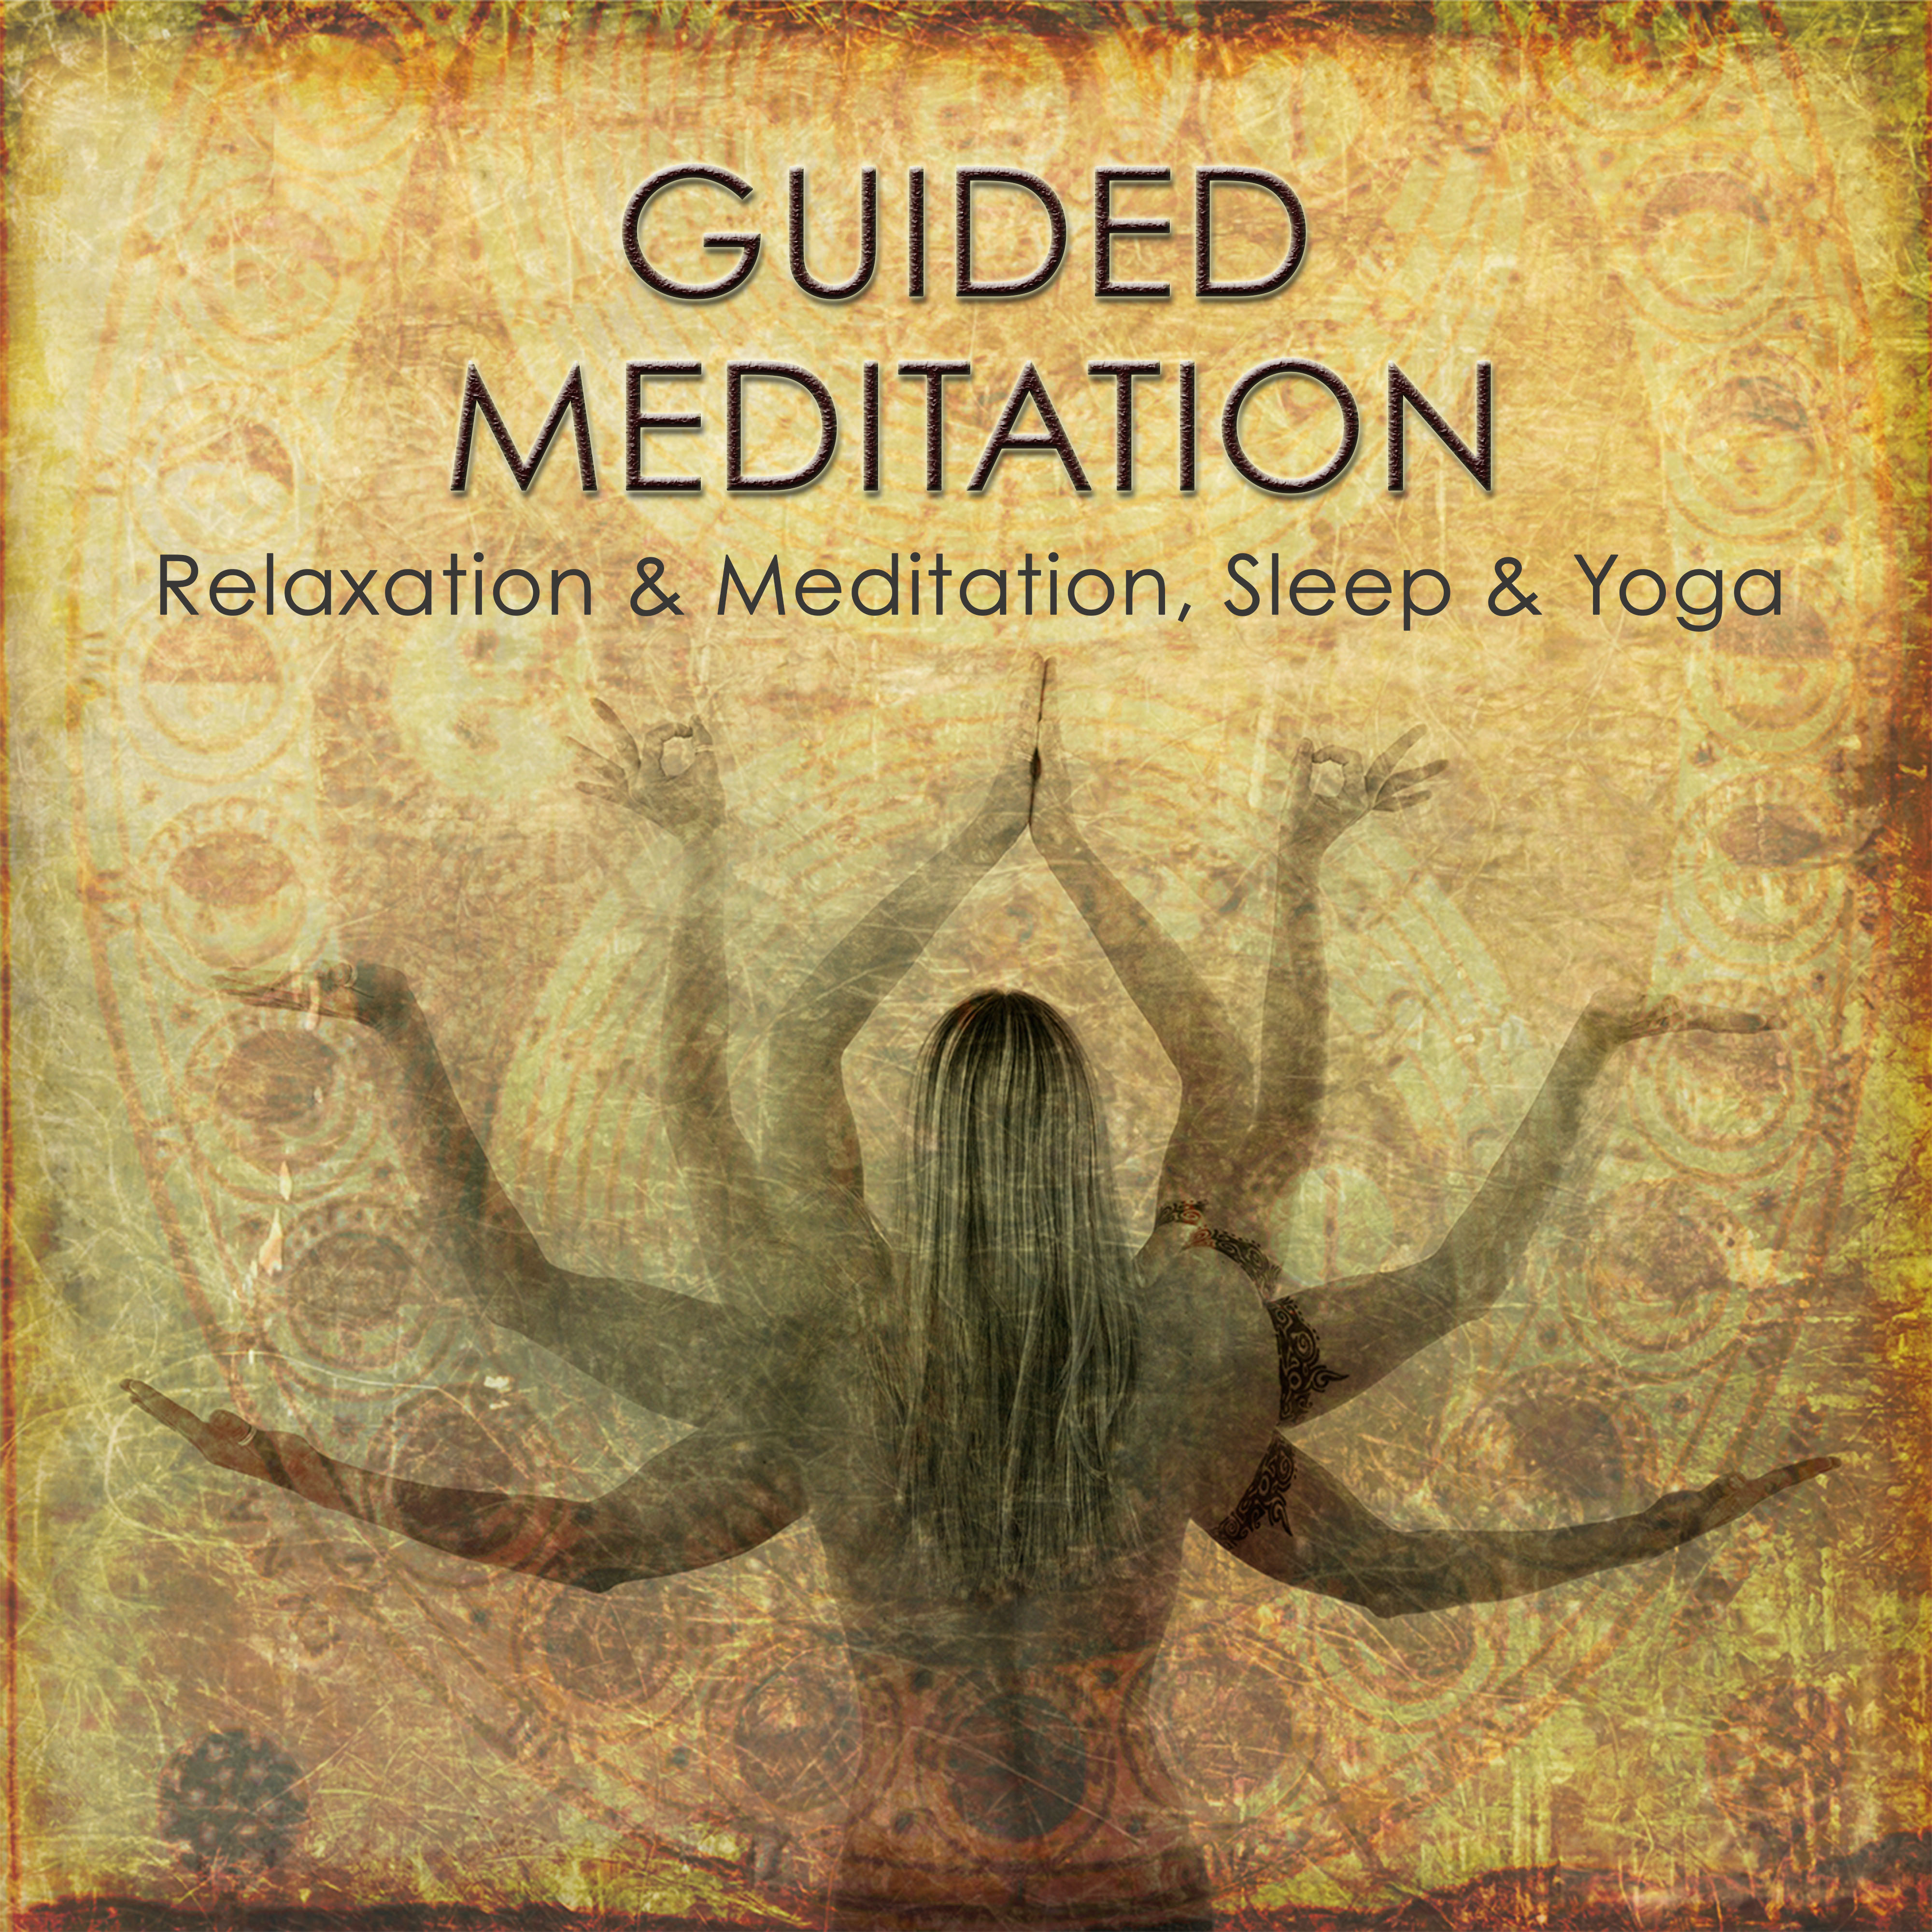 Guided Meditation & Healing Music for Serenity and Sense of Peace